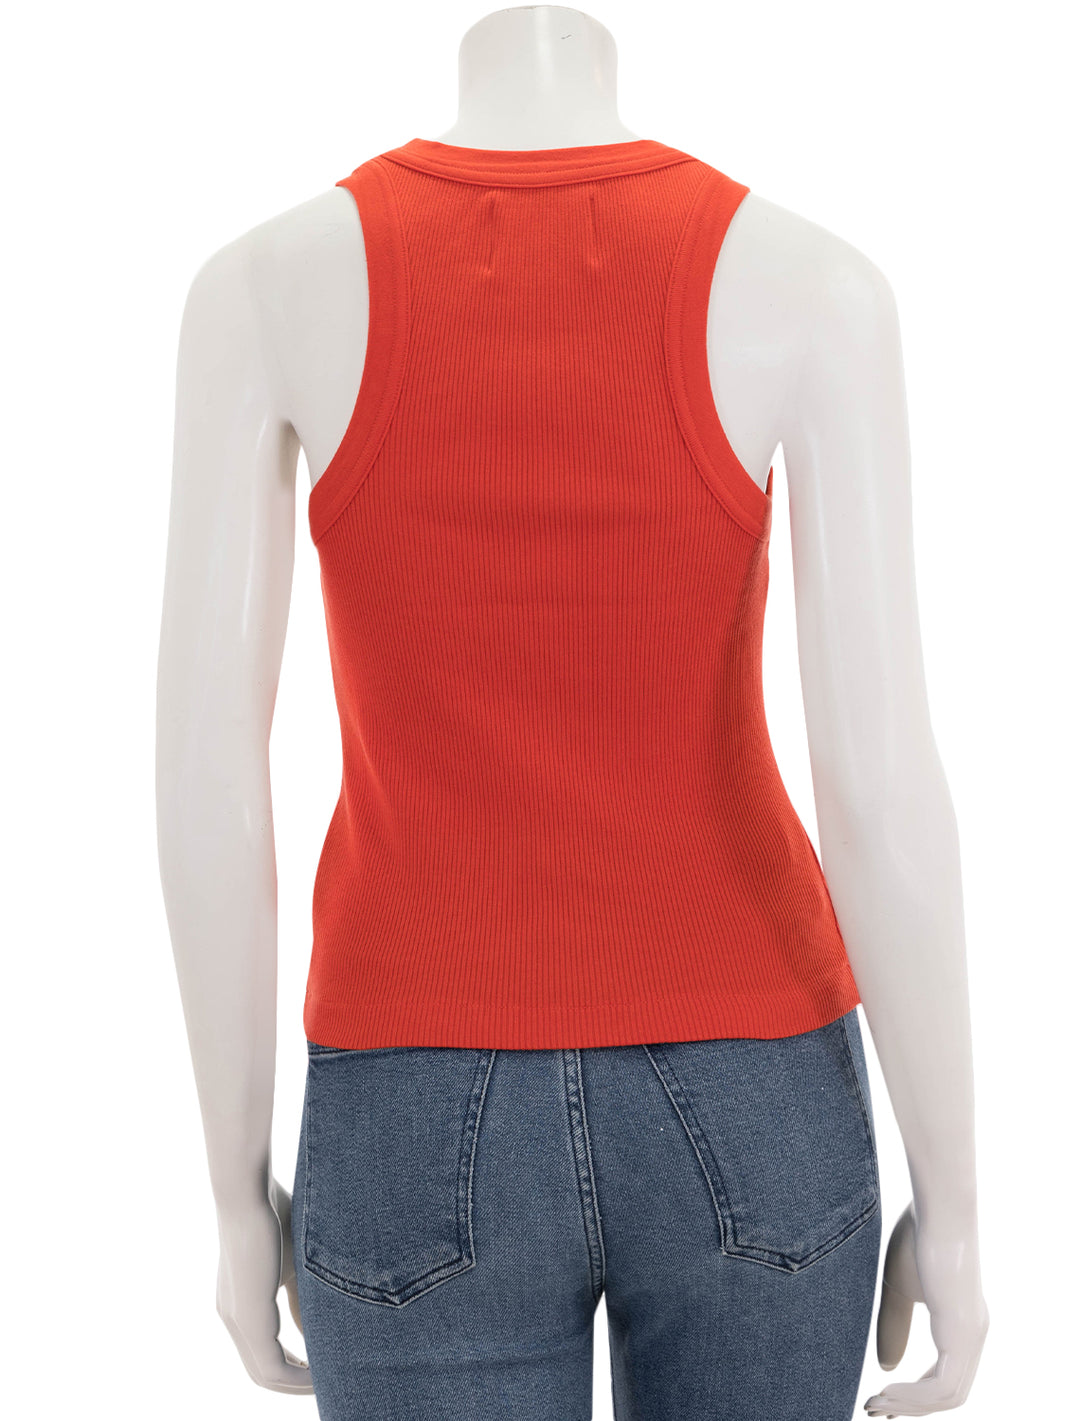 Back view of Citizens of Humanity's isabel tank in coral balm.